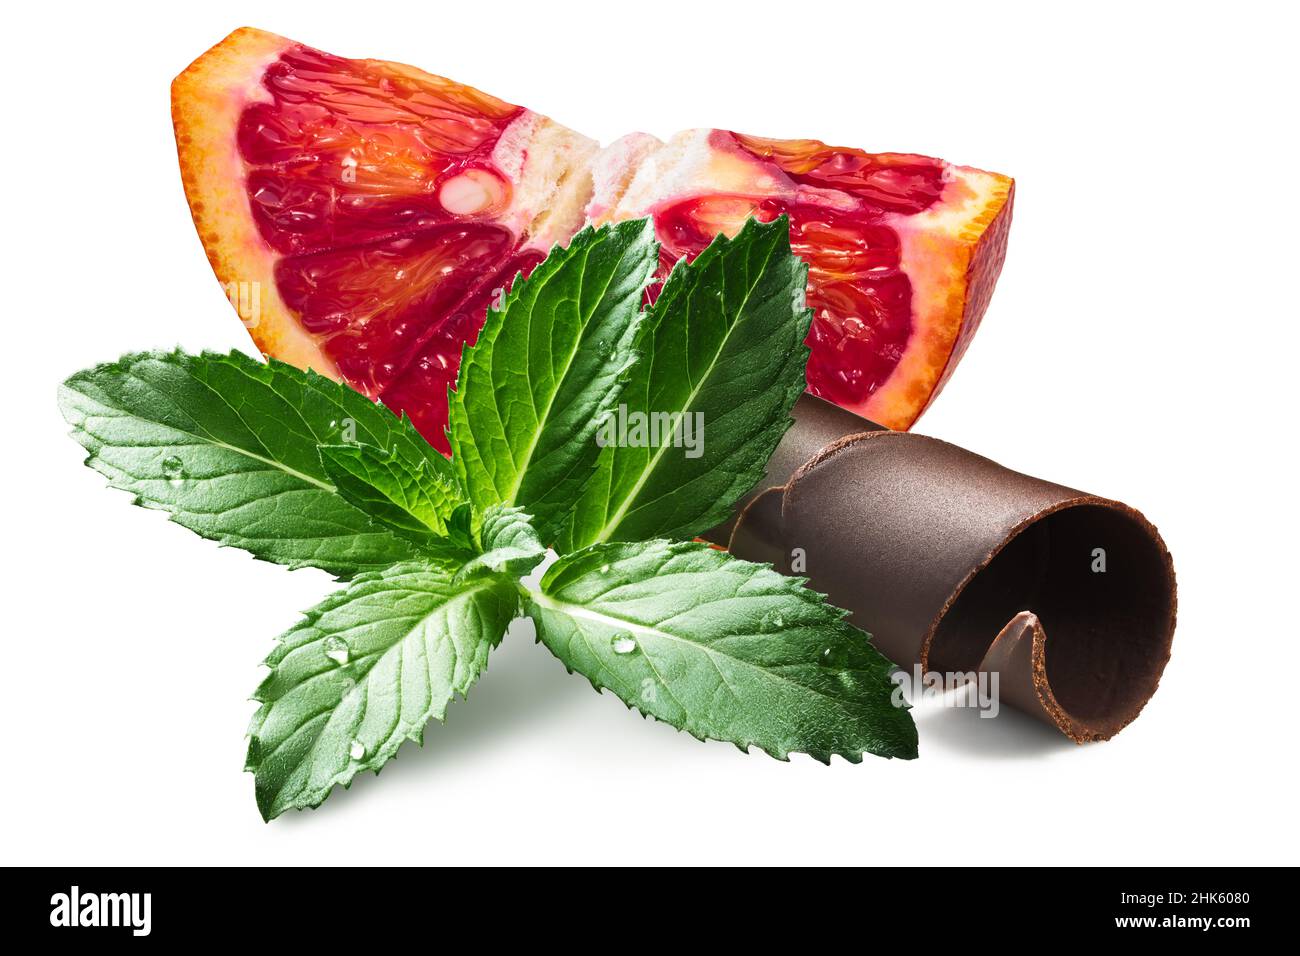 Mint with chocolate curled shaving and blood orange slice, isolated Stock Photo